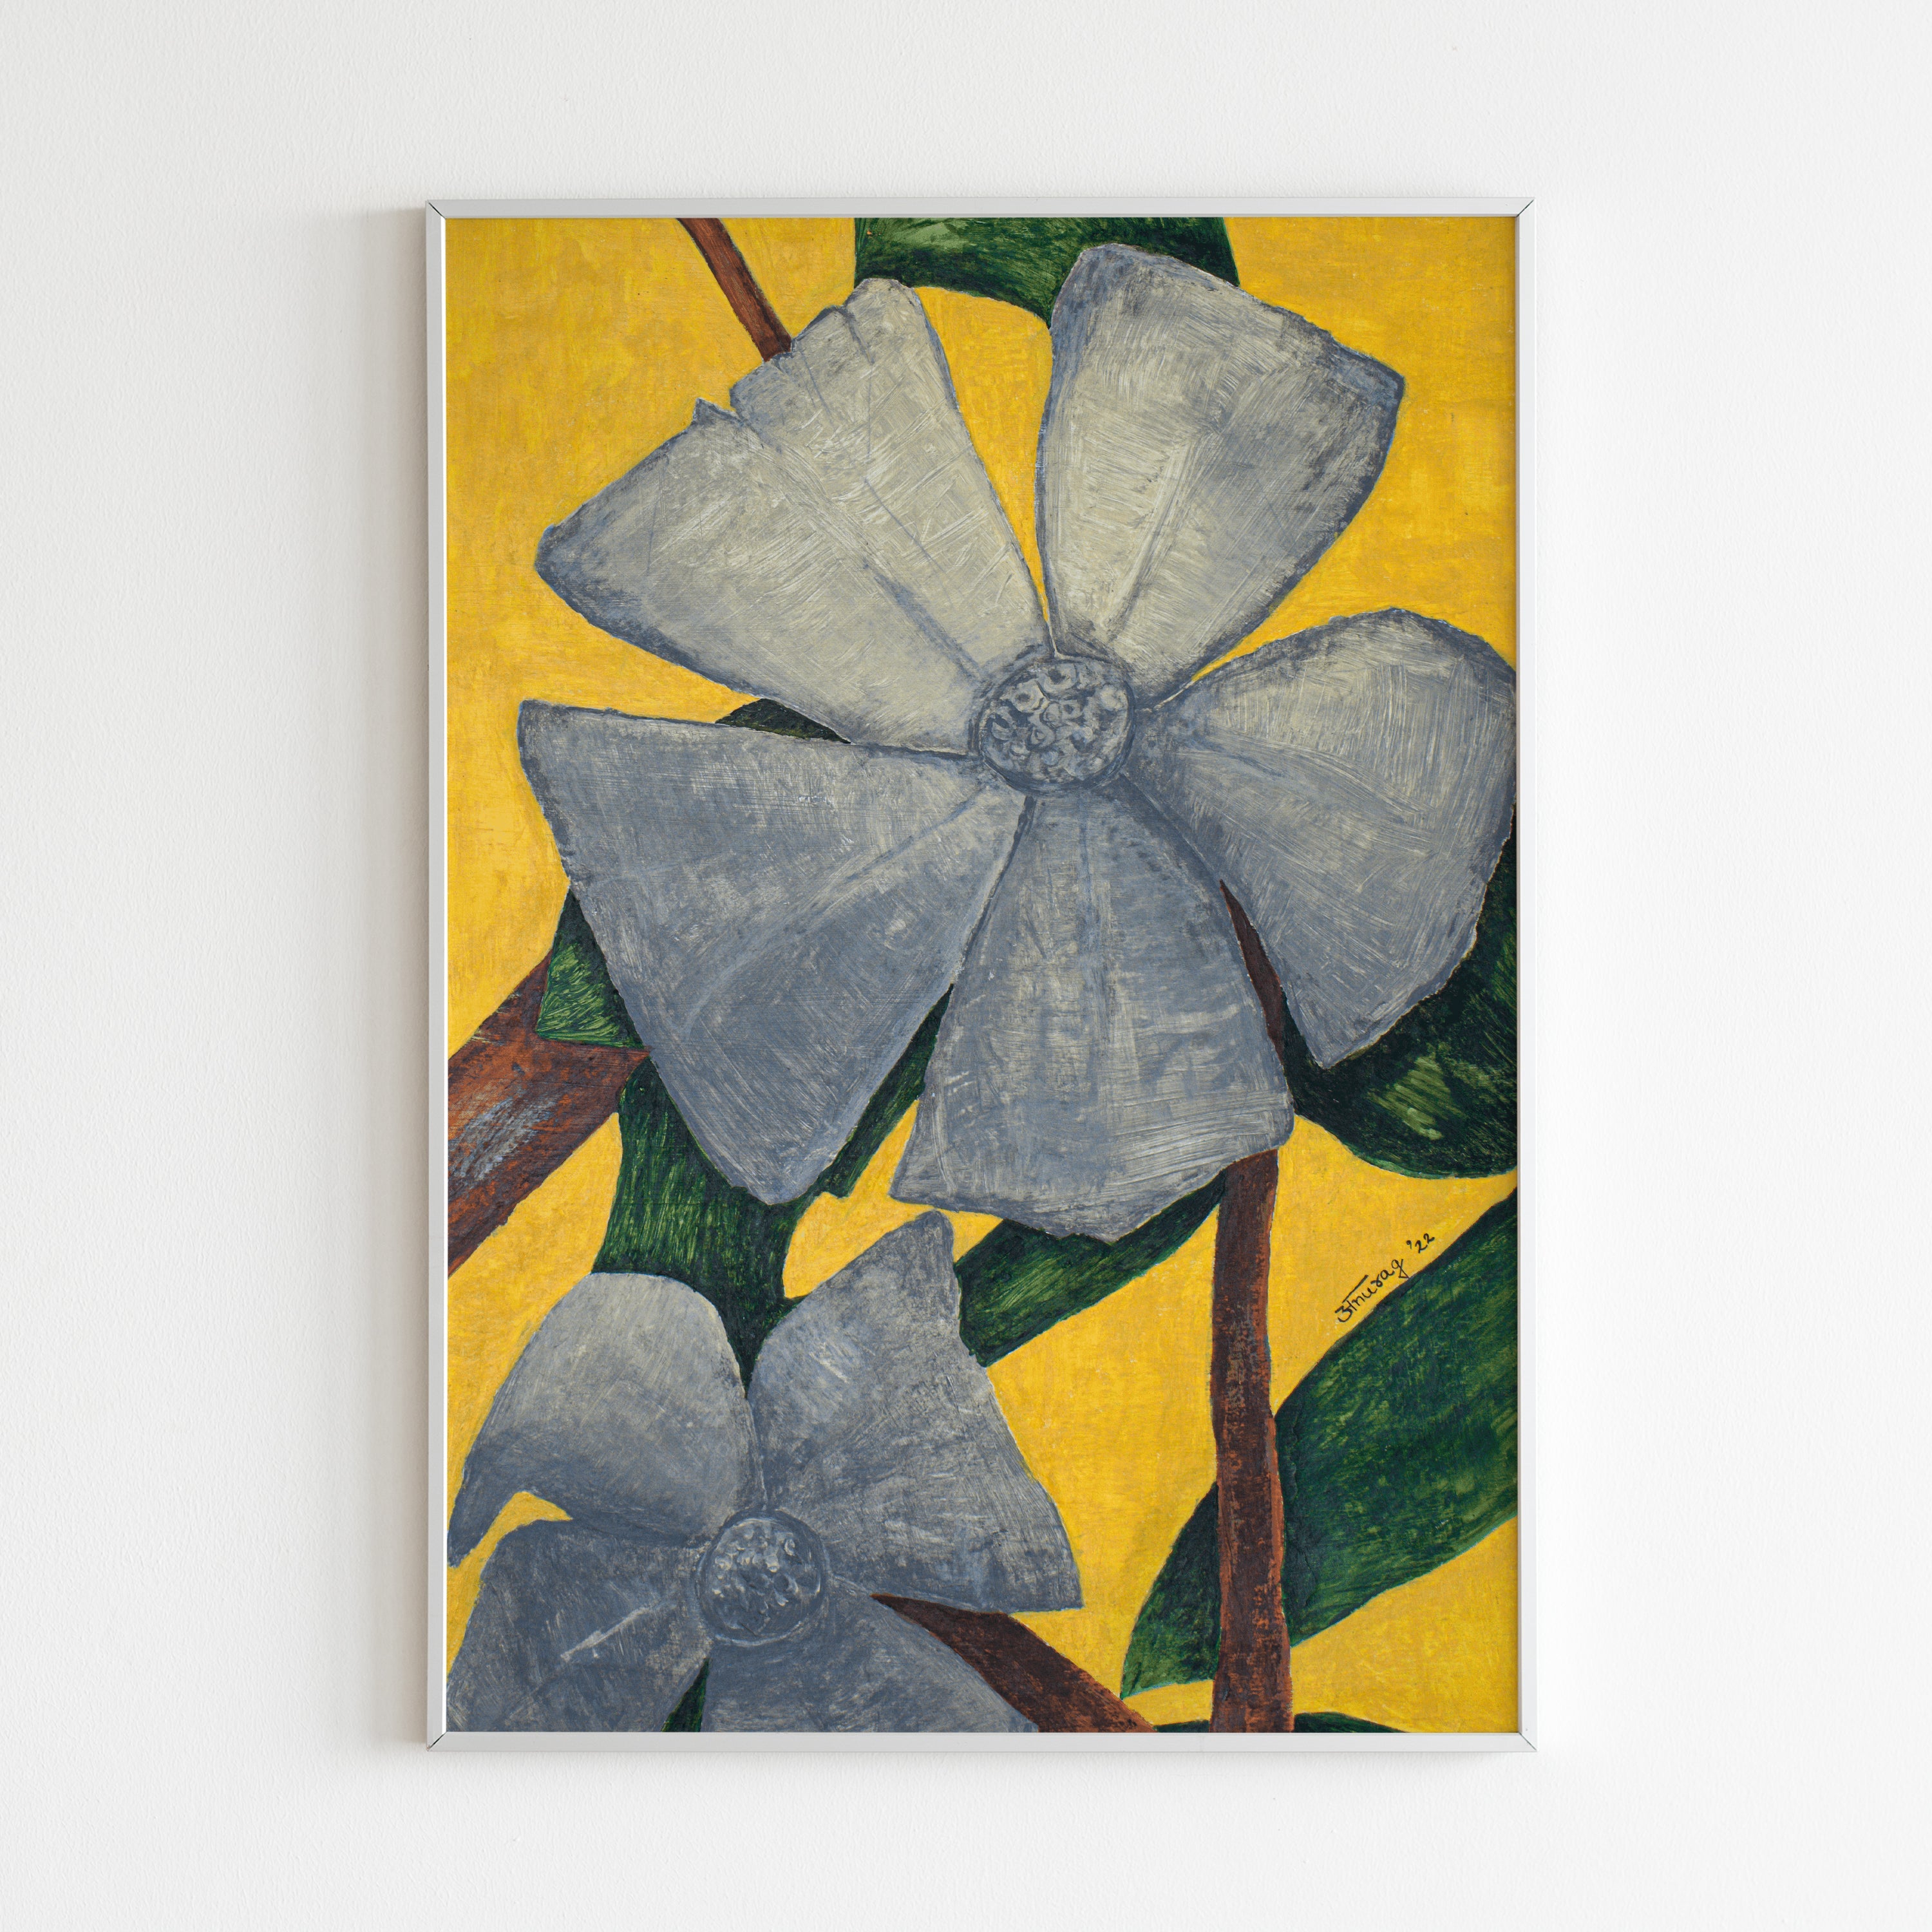 Minimal Floral 1 Artwork Painting by Anurag Anand For Home Wall Art